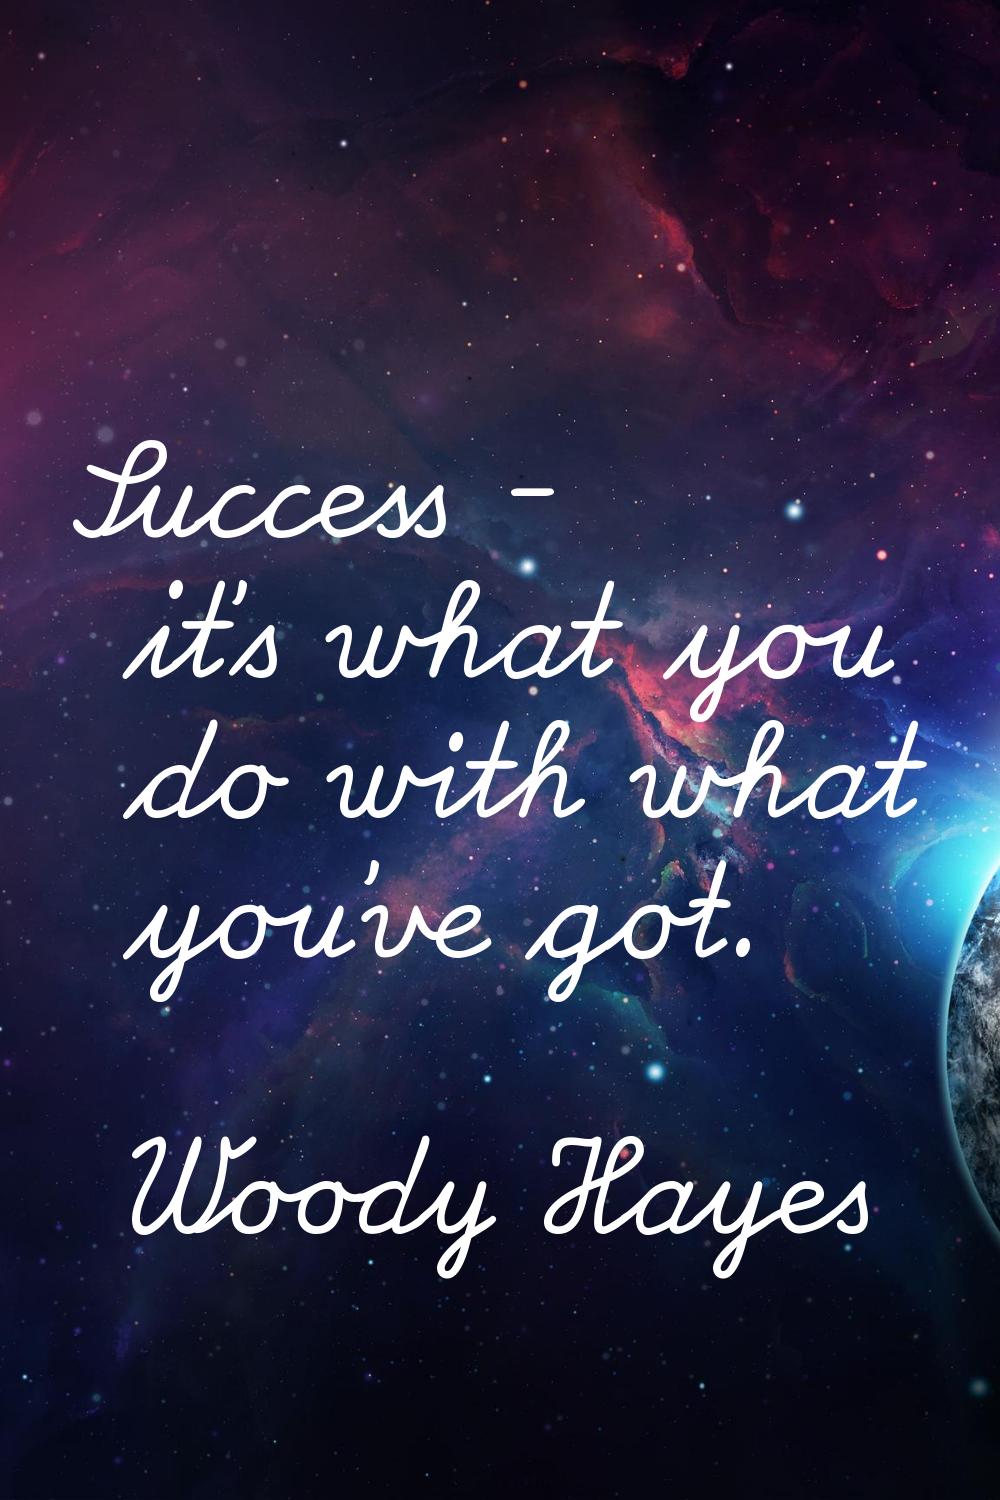 Success - it's what you do with what you've got.